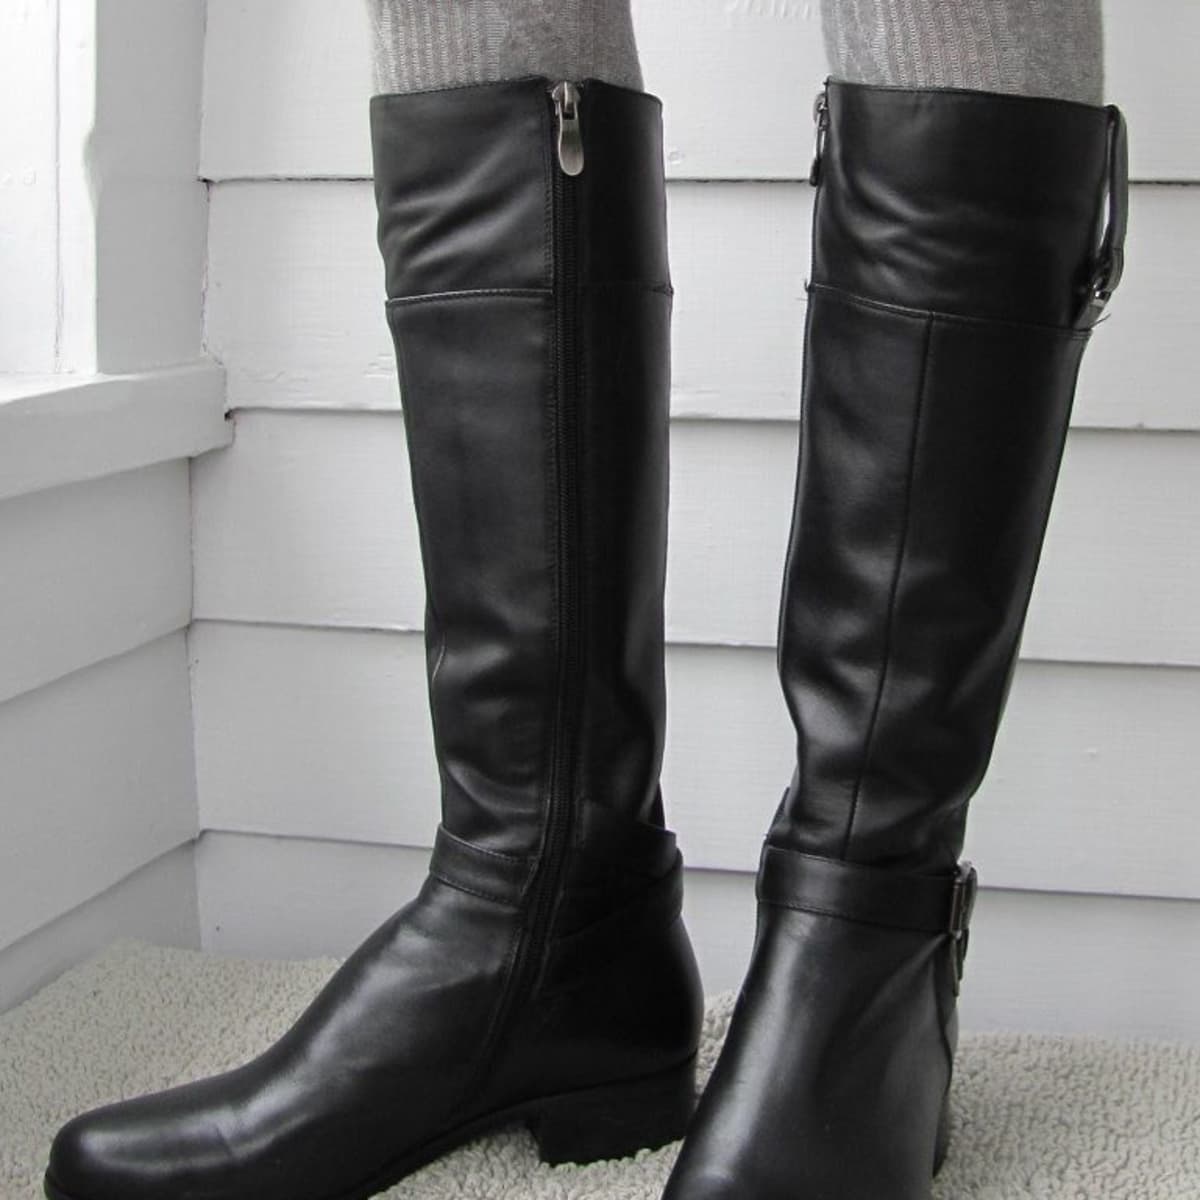 Womens Low Heel Riding Knee High Boots Back Zips Slim Leather Fashion New Shoes